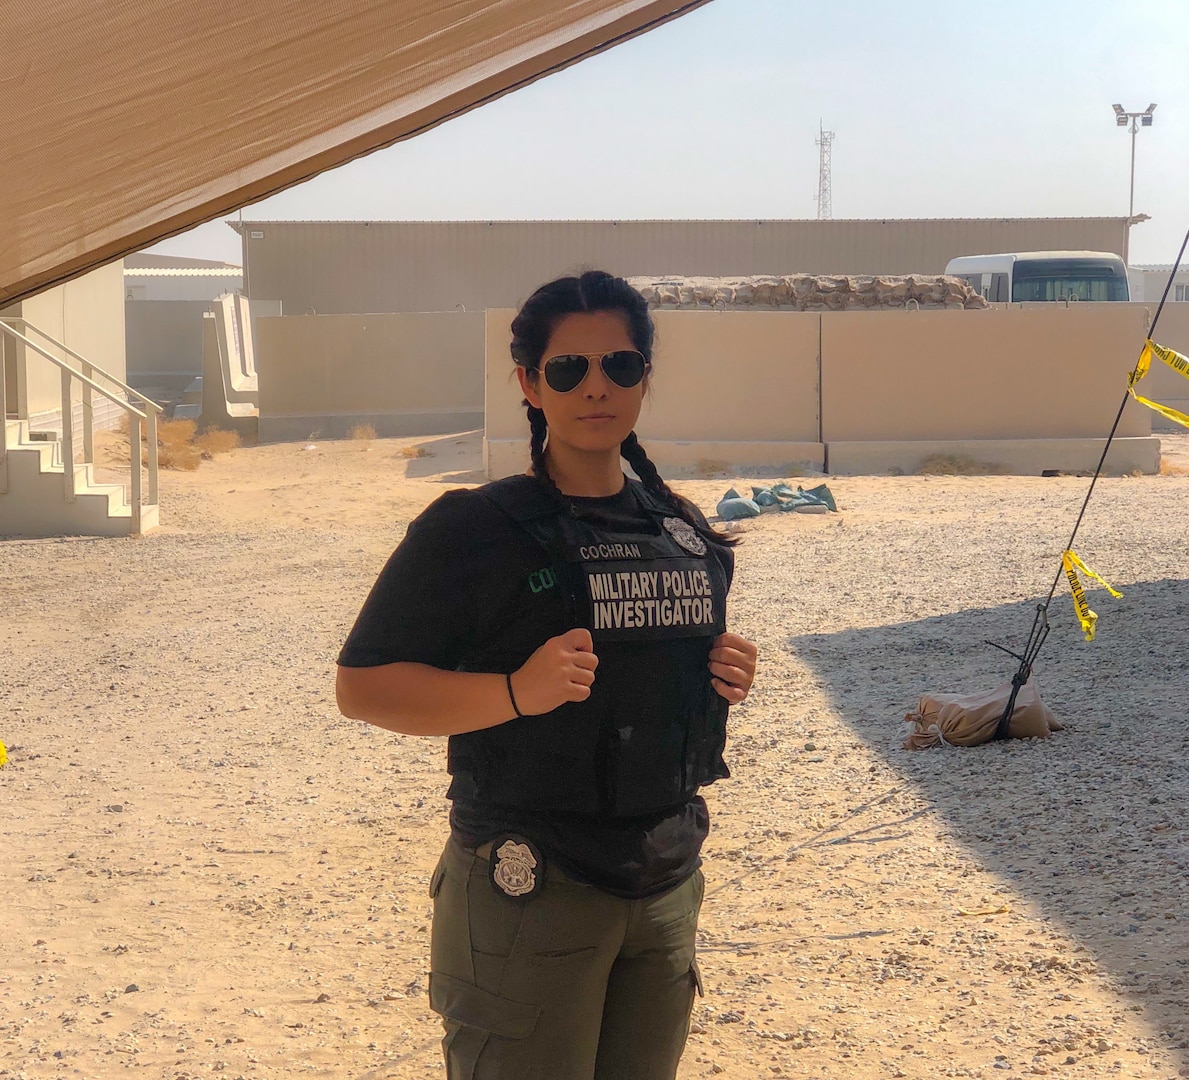 Spc. Alexandria Cochran Kansas City's 1139th Military Police Company, poses in her duty uniform while assigned as a Military Police Investigator deployed in support of the CENTCOM area of operations.